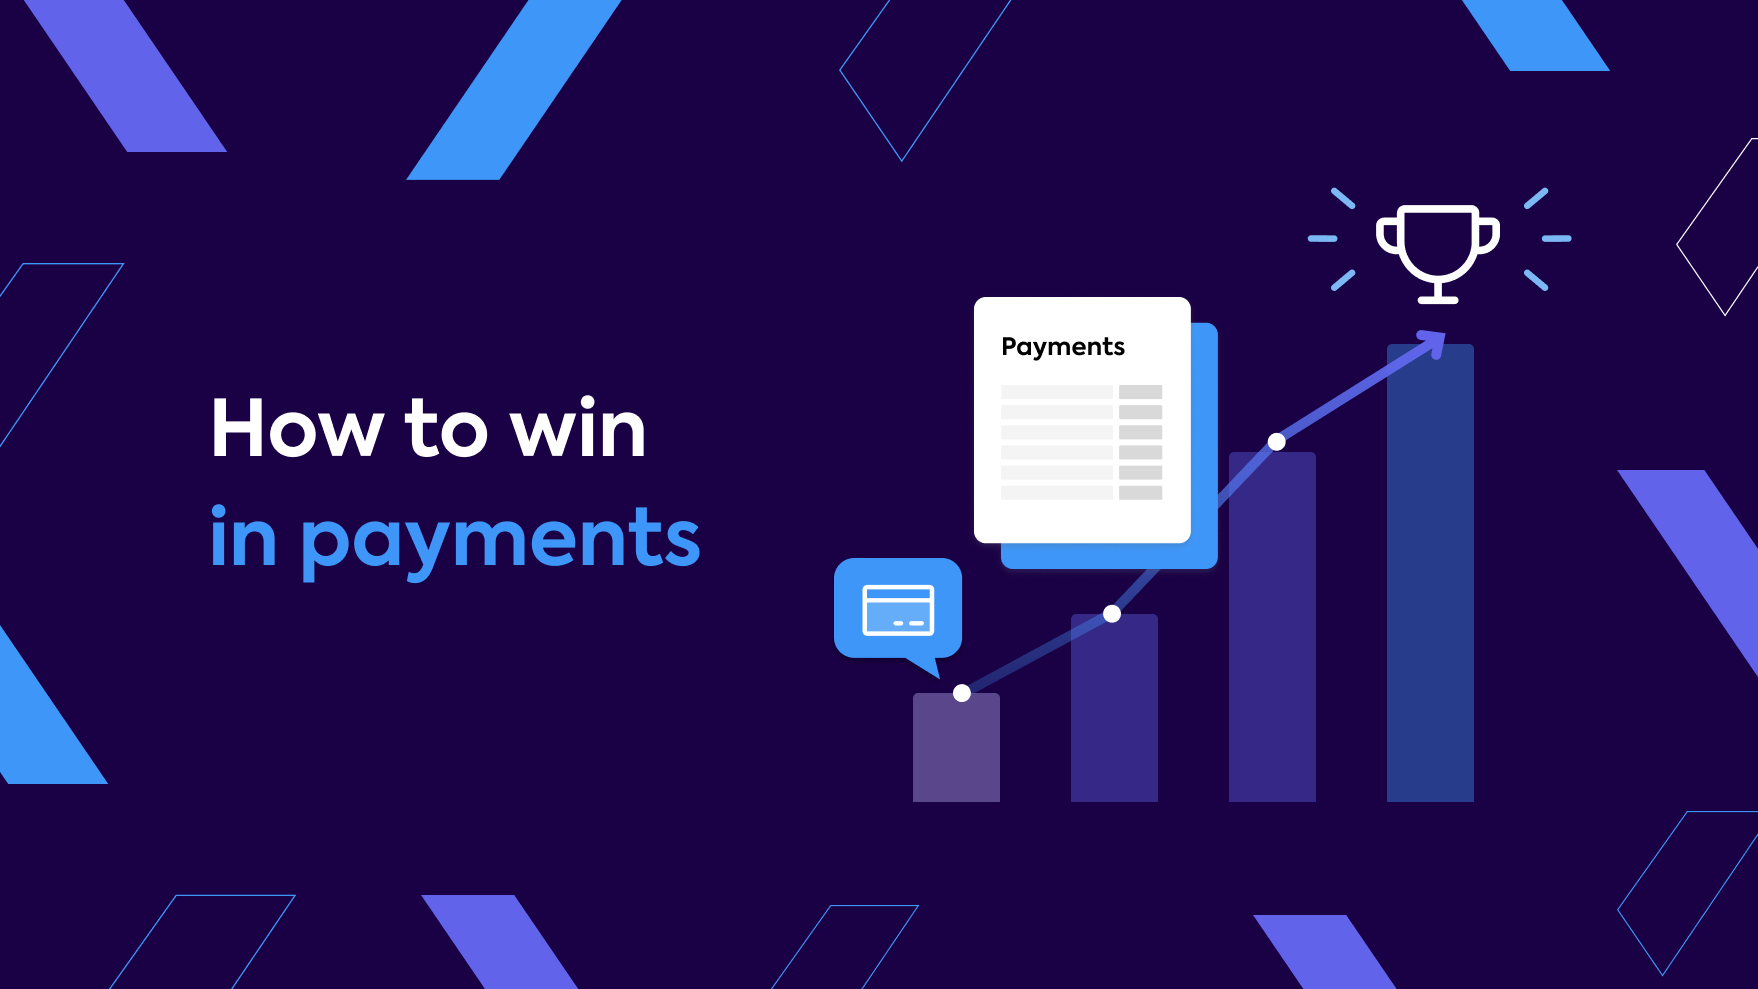 How to win in payments